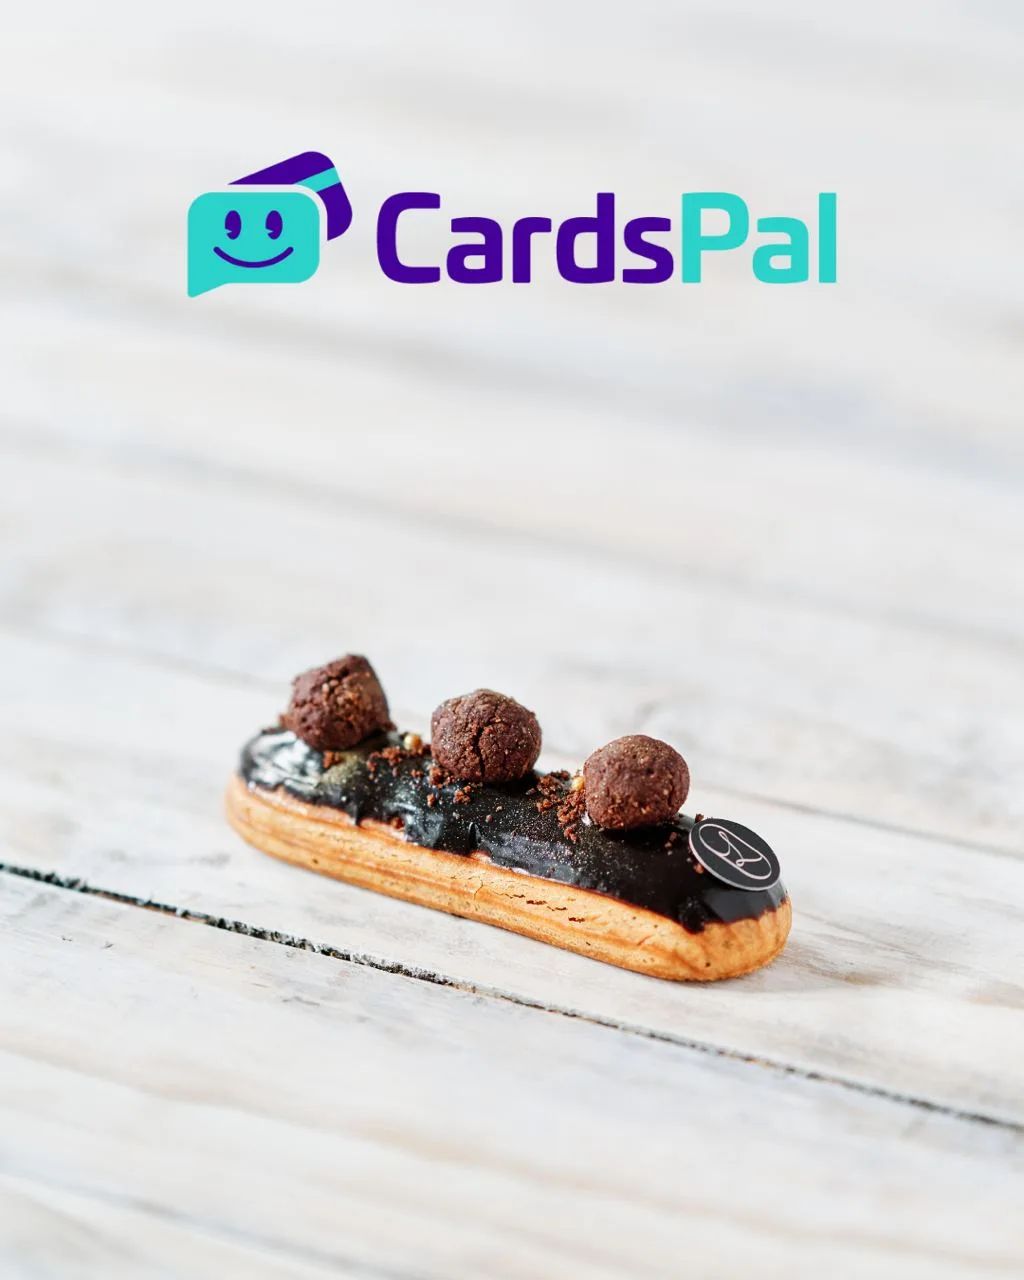 @cardspal goes local 😍  Support your local businesses on CardsPal! 
 
We are happy to be onboard this super cool platform! Not only does CardsPal help to consolidate all of your credit card deals, it also brings together promotions from a wide variety of merchants for you to choose from! There's so much more to discover so do check them out!